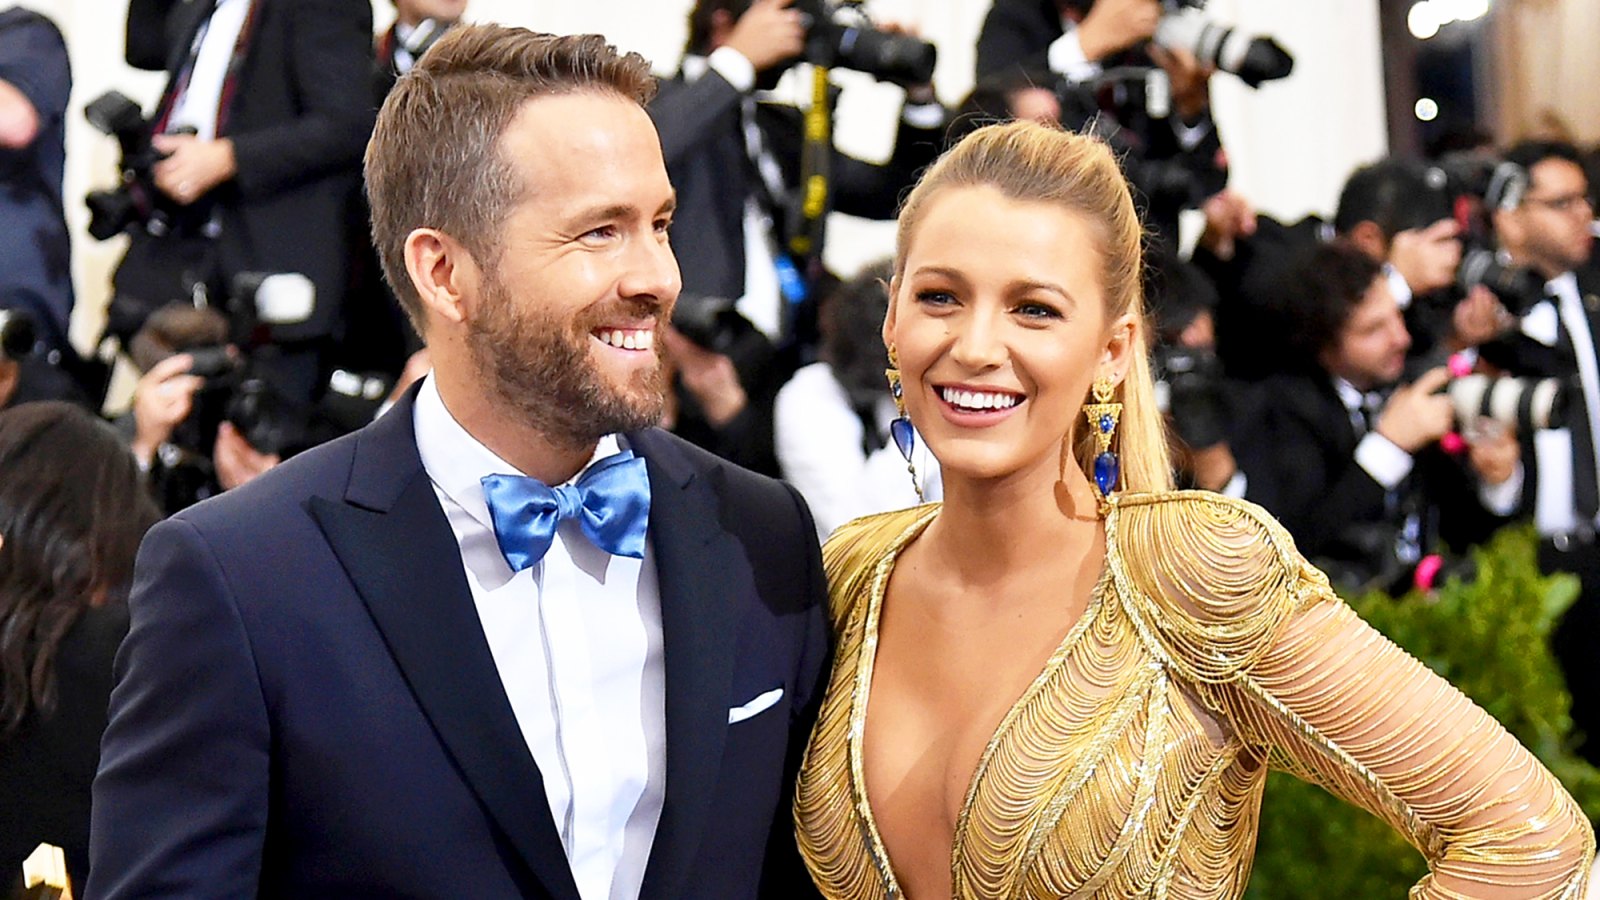 Ryan Reynolds and Blake Lively attend the "Rei Kawakubo/Comme des Garcons: Art Of The In-Between" Costume Institute Gala at Metropolitan Museum of Art on May 1, 2017 in New York City.